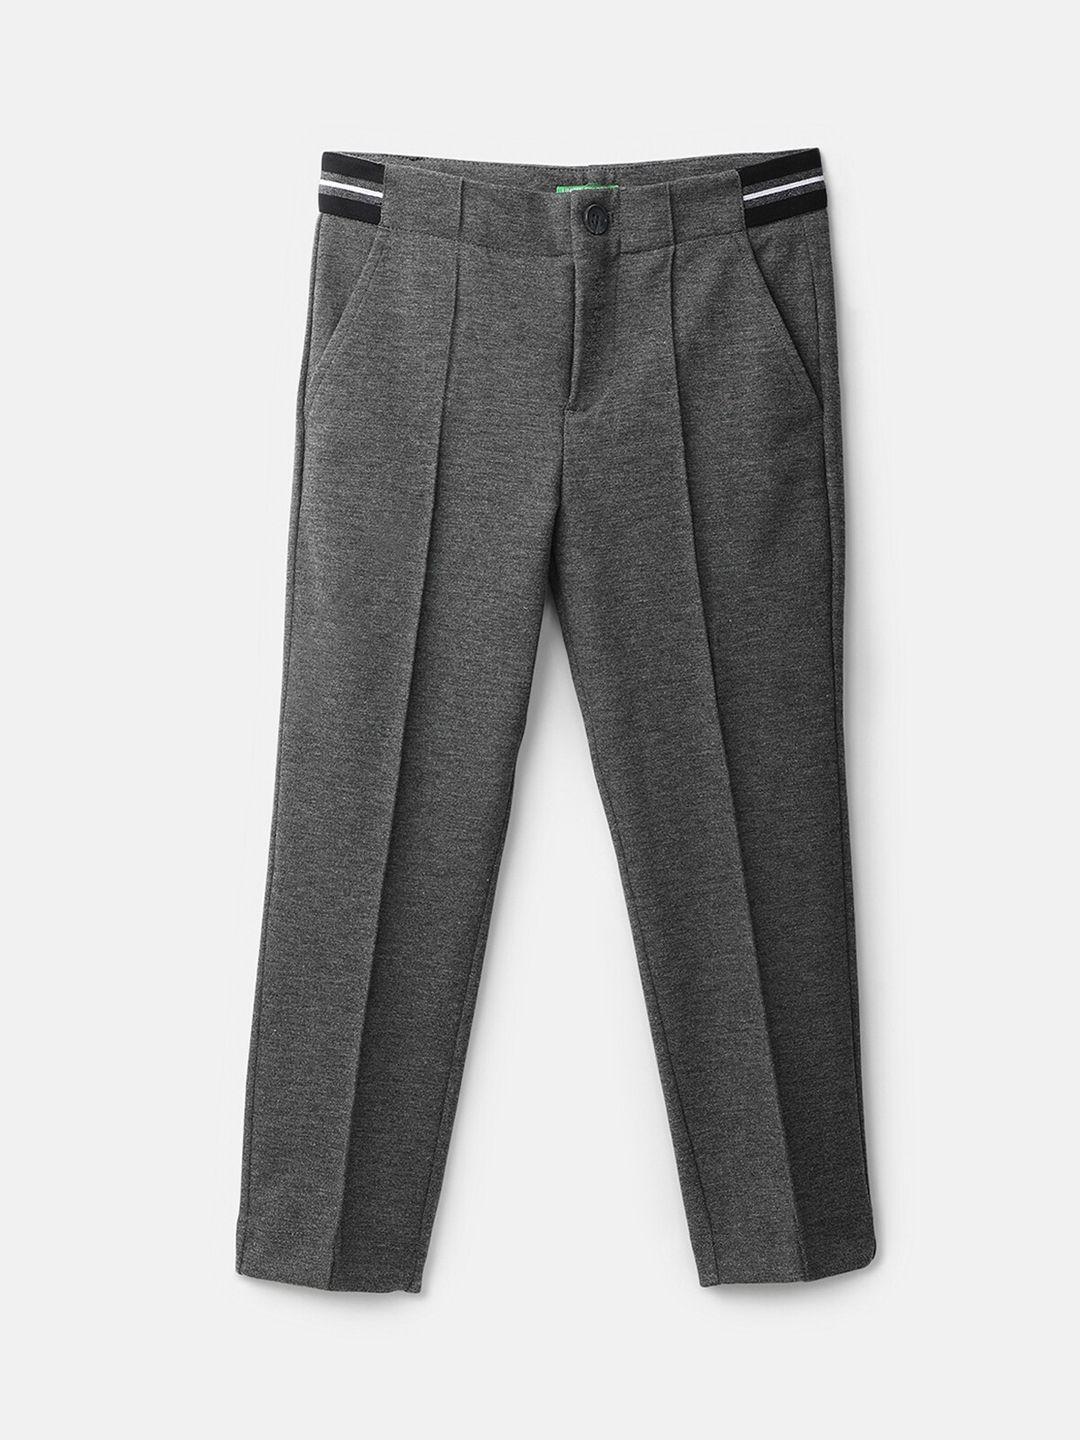 united-colors-of-benetton-boys-grey-solid-slim-fit-pleated-trousers